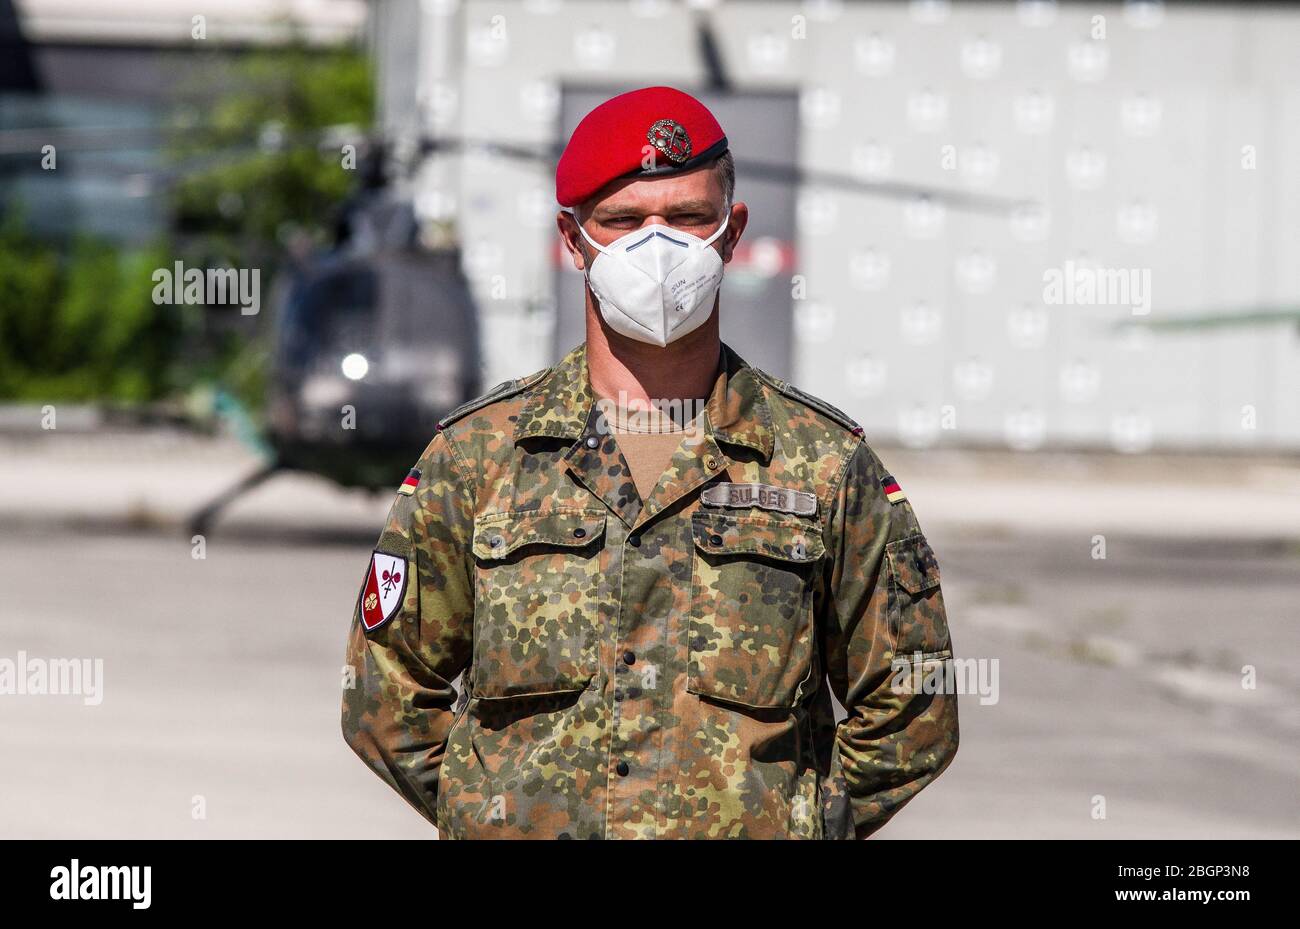 April 22, 2020, Neubiberg Bei Muenchen, Bavaria, Germany: German Bundeswehr soldiers wear gas masks and Dupint TyChem C protective clothing while mixing the constituents together to make Oxicide, a surface disinfectant used in the fight against Coronavirus. Stock Photo